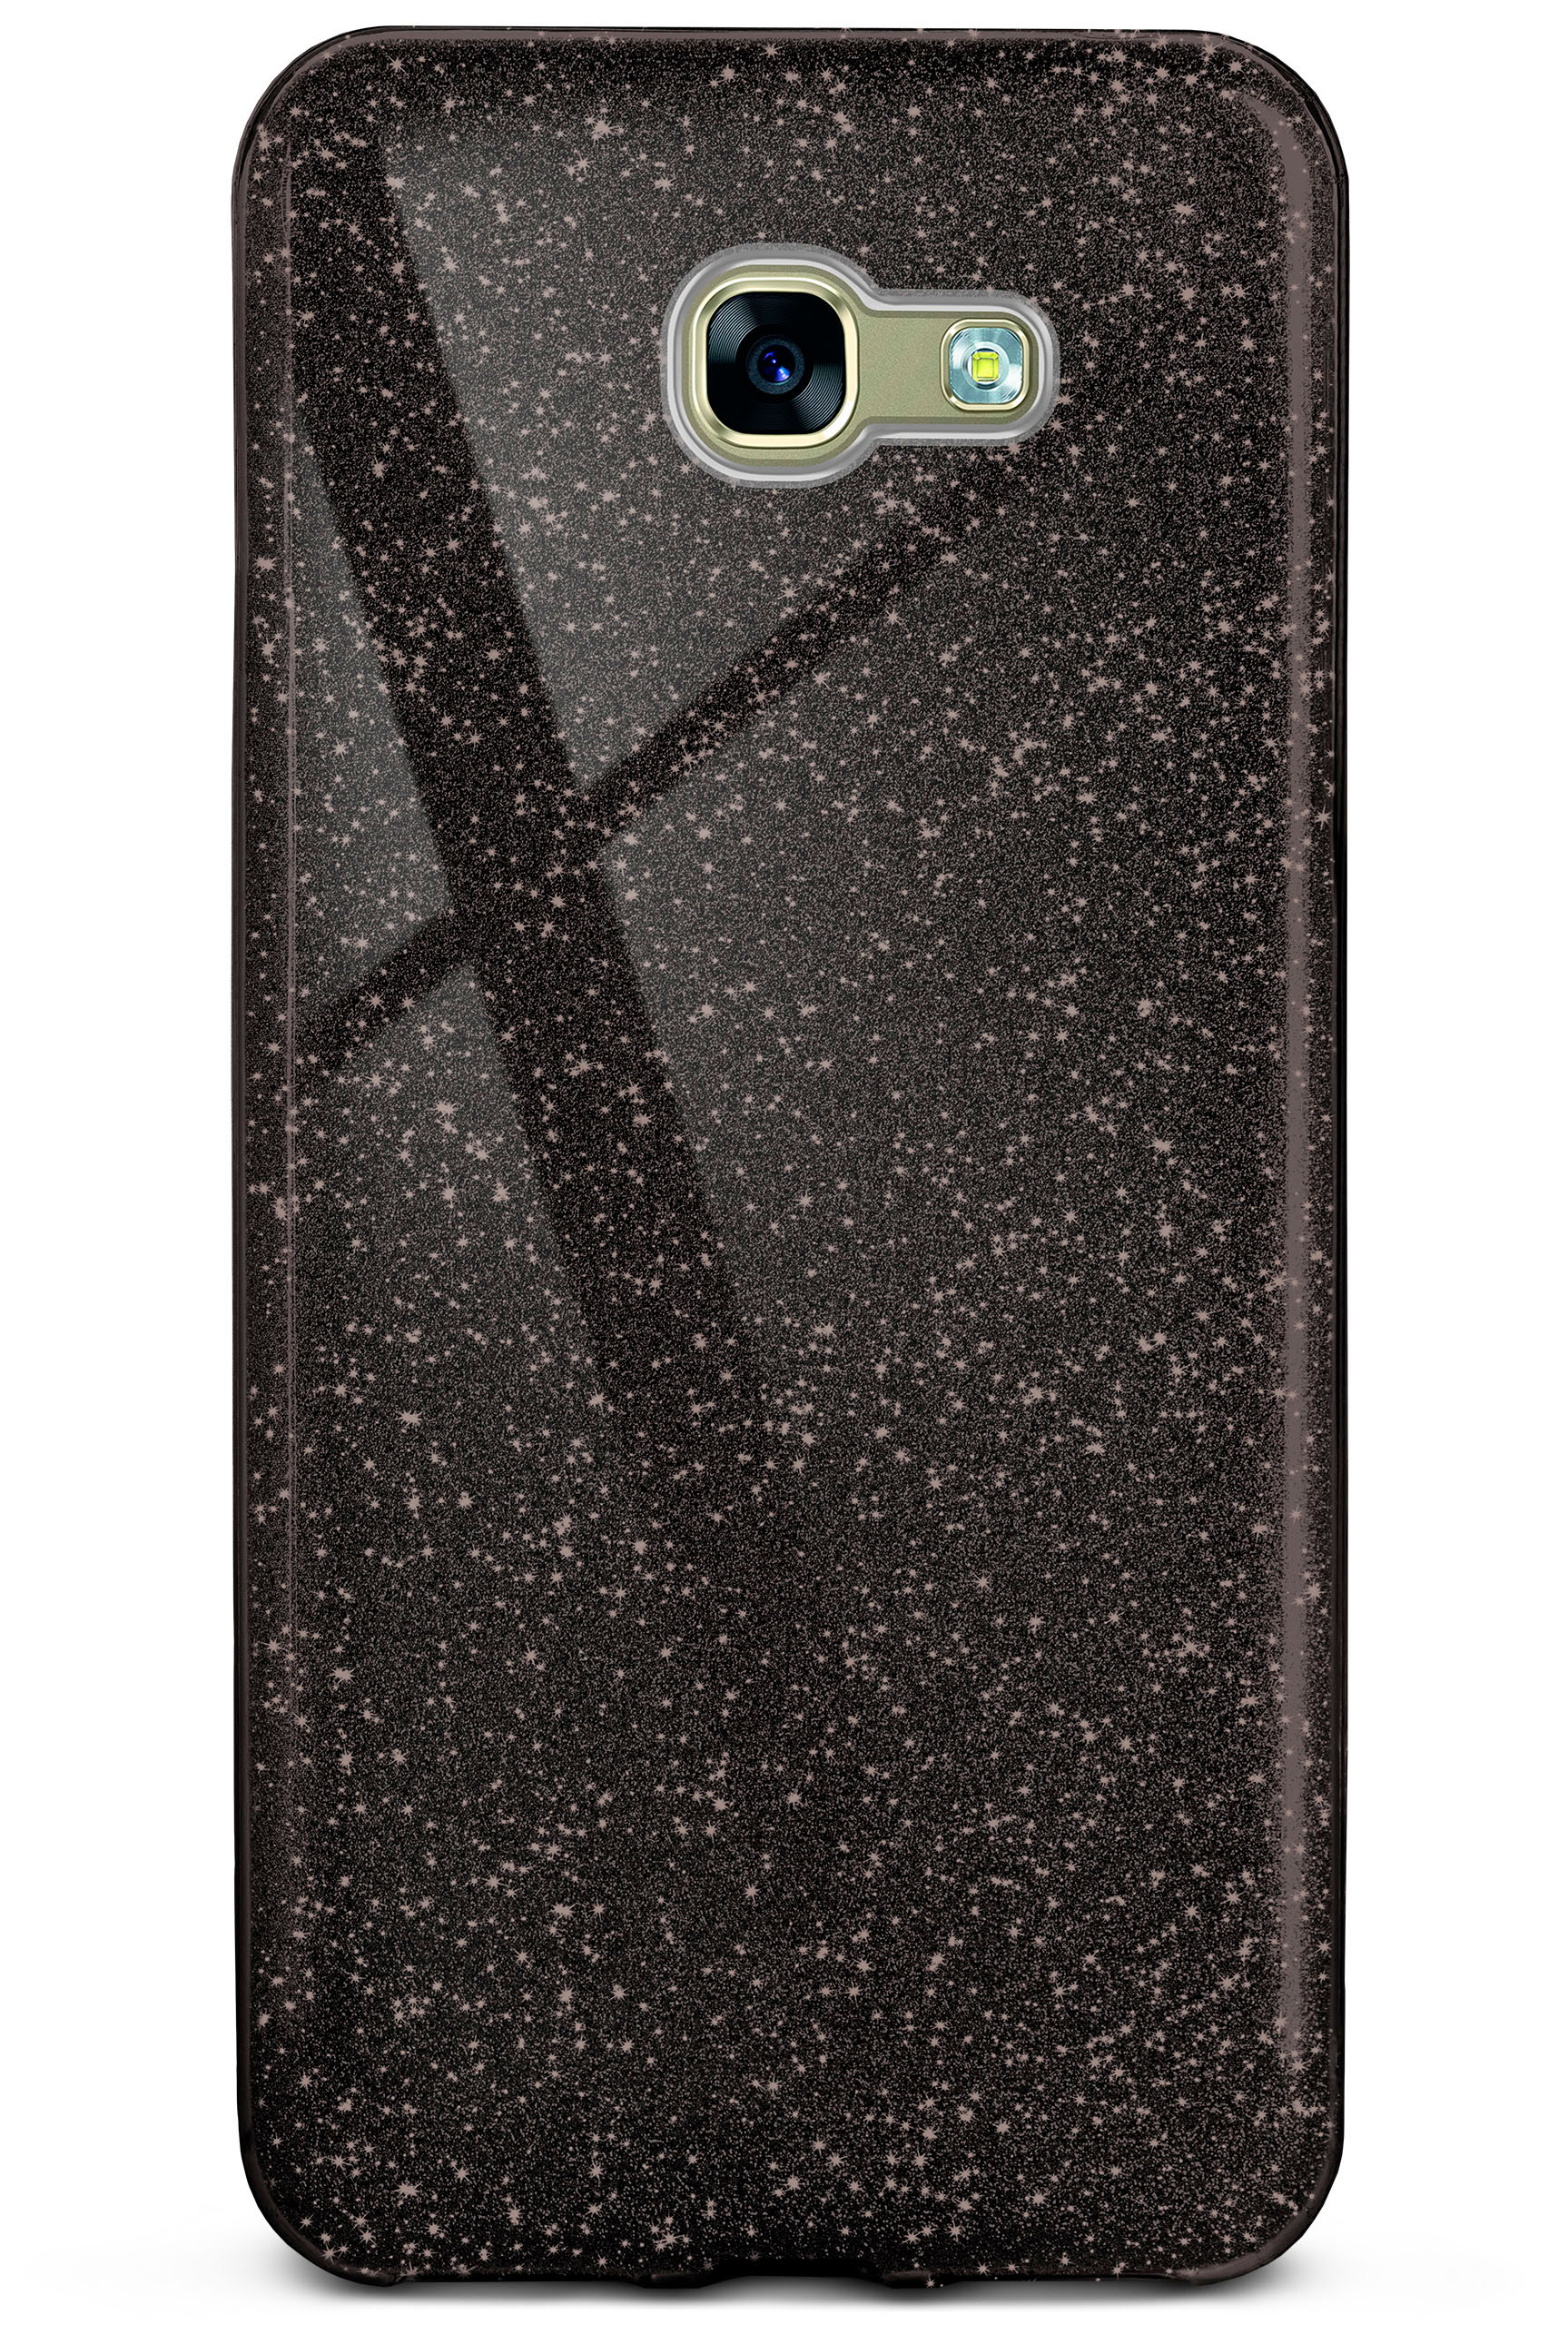 ONEFLOW Glitter Backcover, Galaxy (2017), A3 Glamour Samsung, Case, - Black